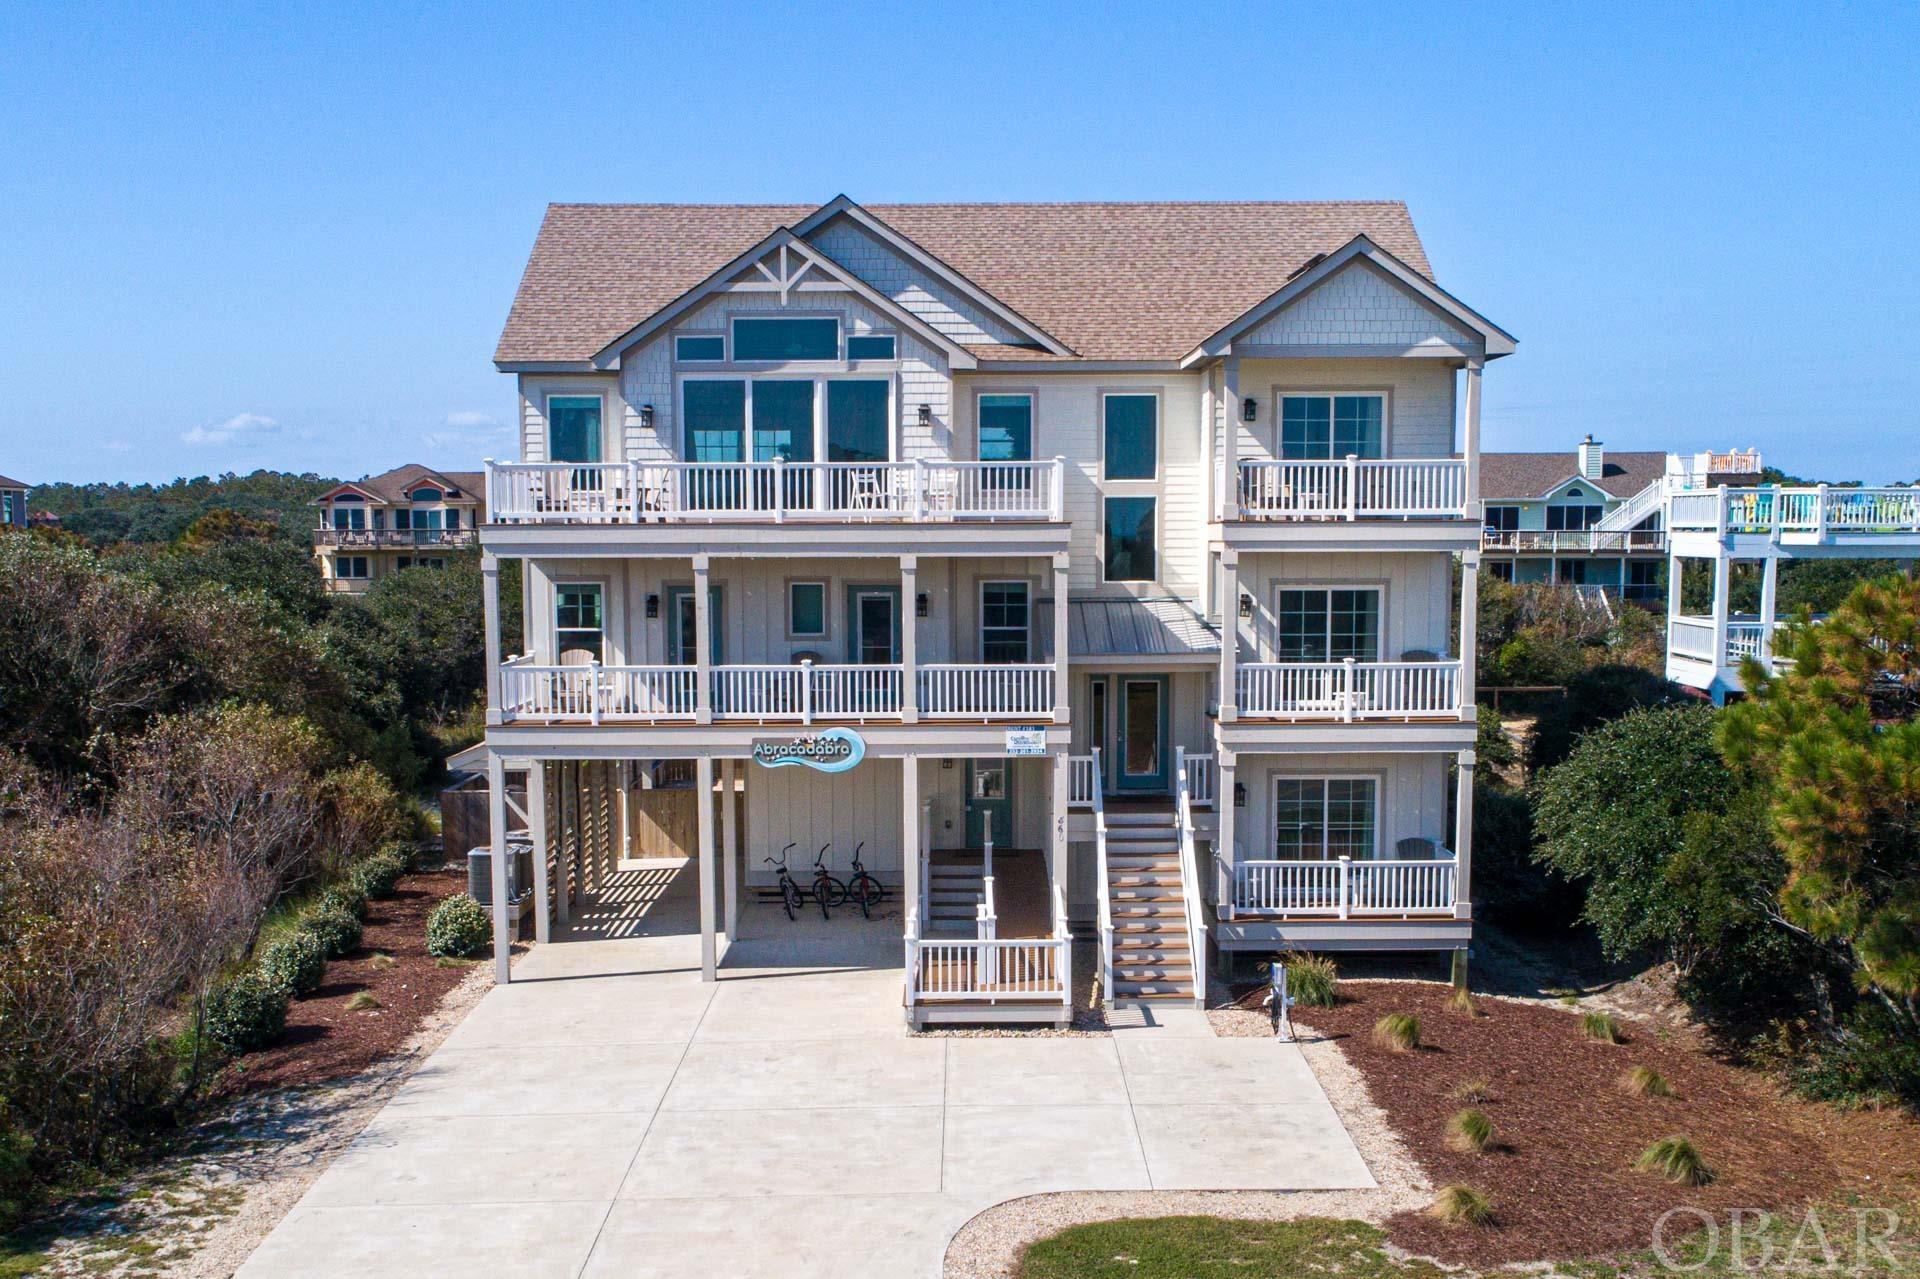 Nestled in the picturesque Whalehead community, this exquisite 10-bedroom home, completed in 2020, offers a harmonious blend of luxury and coastal living. Step inside and be greeted by a modern marvel with ocean views. A private elevator ensures easy access to every level of this sprawling coastal retreat, making it accessible for all. Entertainment takes center stage with a dedicated media room, perfect for family movie nights or watching your favorite sport. Your guests will be delighted by the spacious en suite bedrooms, ensuring comfort and privacy for all. The outdoor oasis is a true paradise boasting a concrete heated pool invites year-round relaxation, while the composite siding and Trex decking ensure durability and low maintenance. This home is in an X flood zone with no flood insurance required. This rental company provides an EV charger perfect for those with electric cars. Savor sunsets on the deck or take a short stroll to the beach for a dip in the Atlantic. Situated close to the iconic Corolla Lighthouse, you're also just moments away from shopping, restaurants, and the allure of the wild horses that roam freely in Carova just minutes away. This beach house is a lucrative investment opportunity, with incredible rental income!